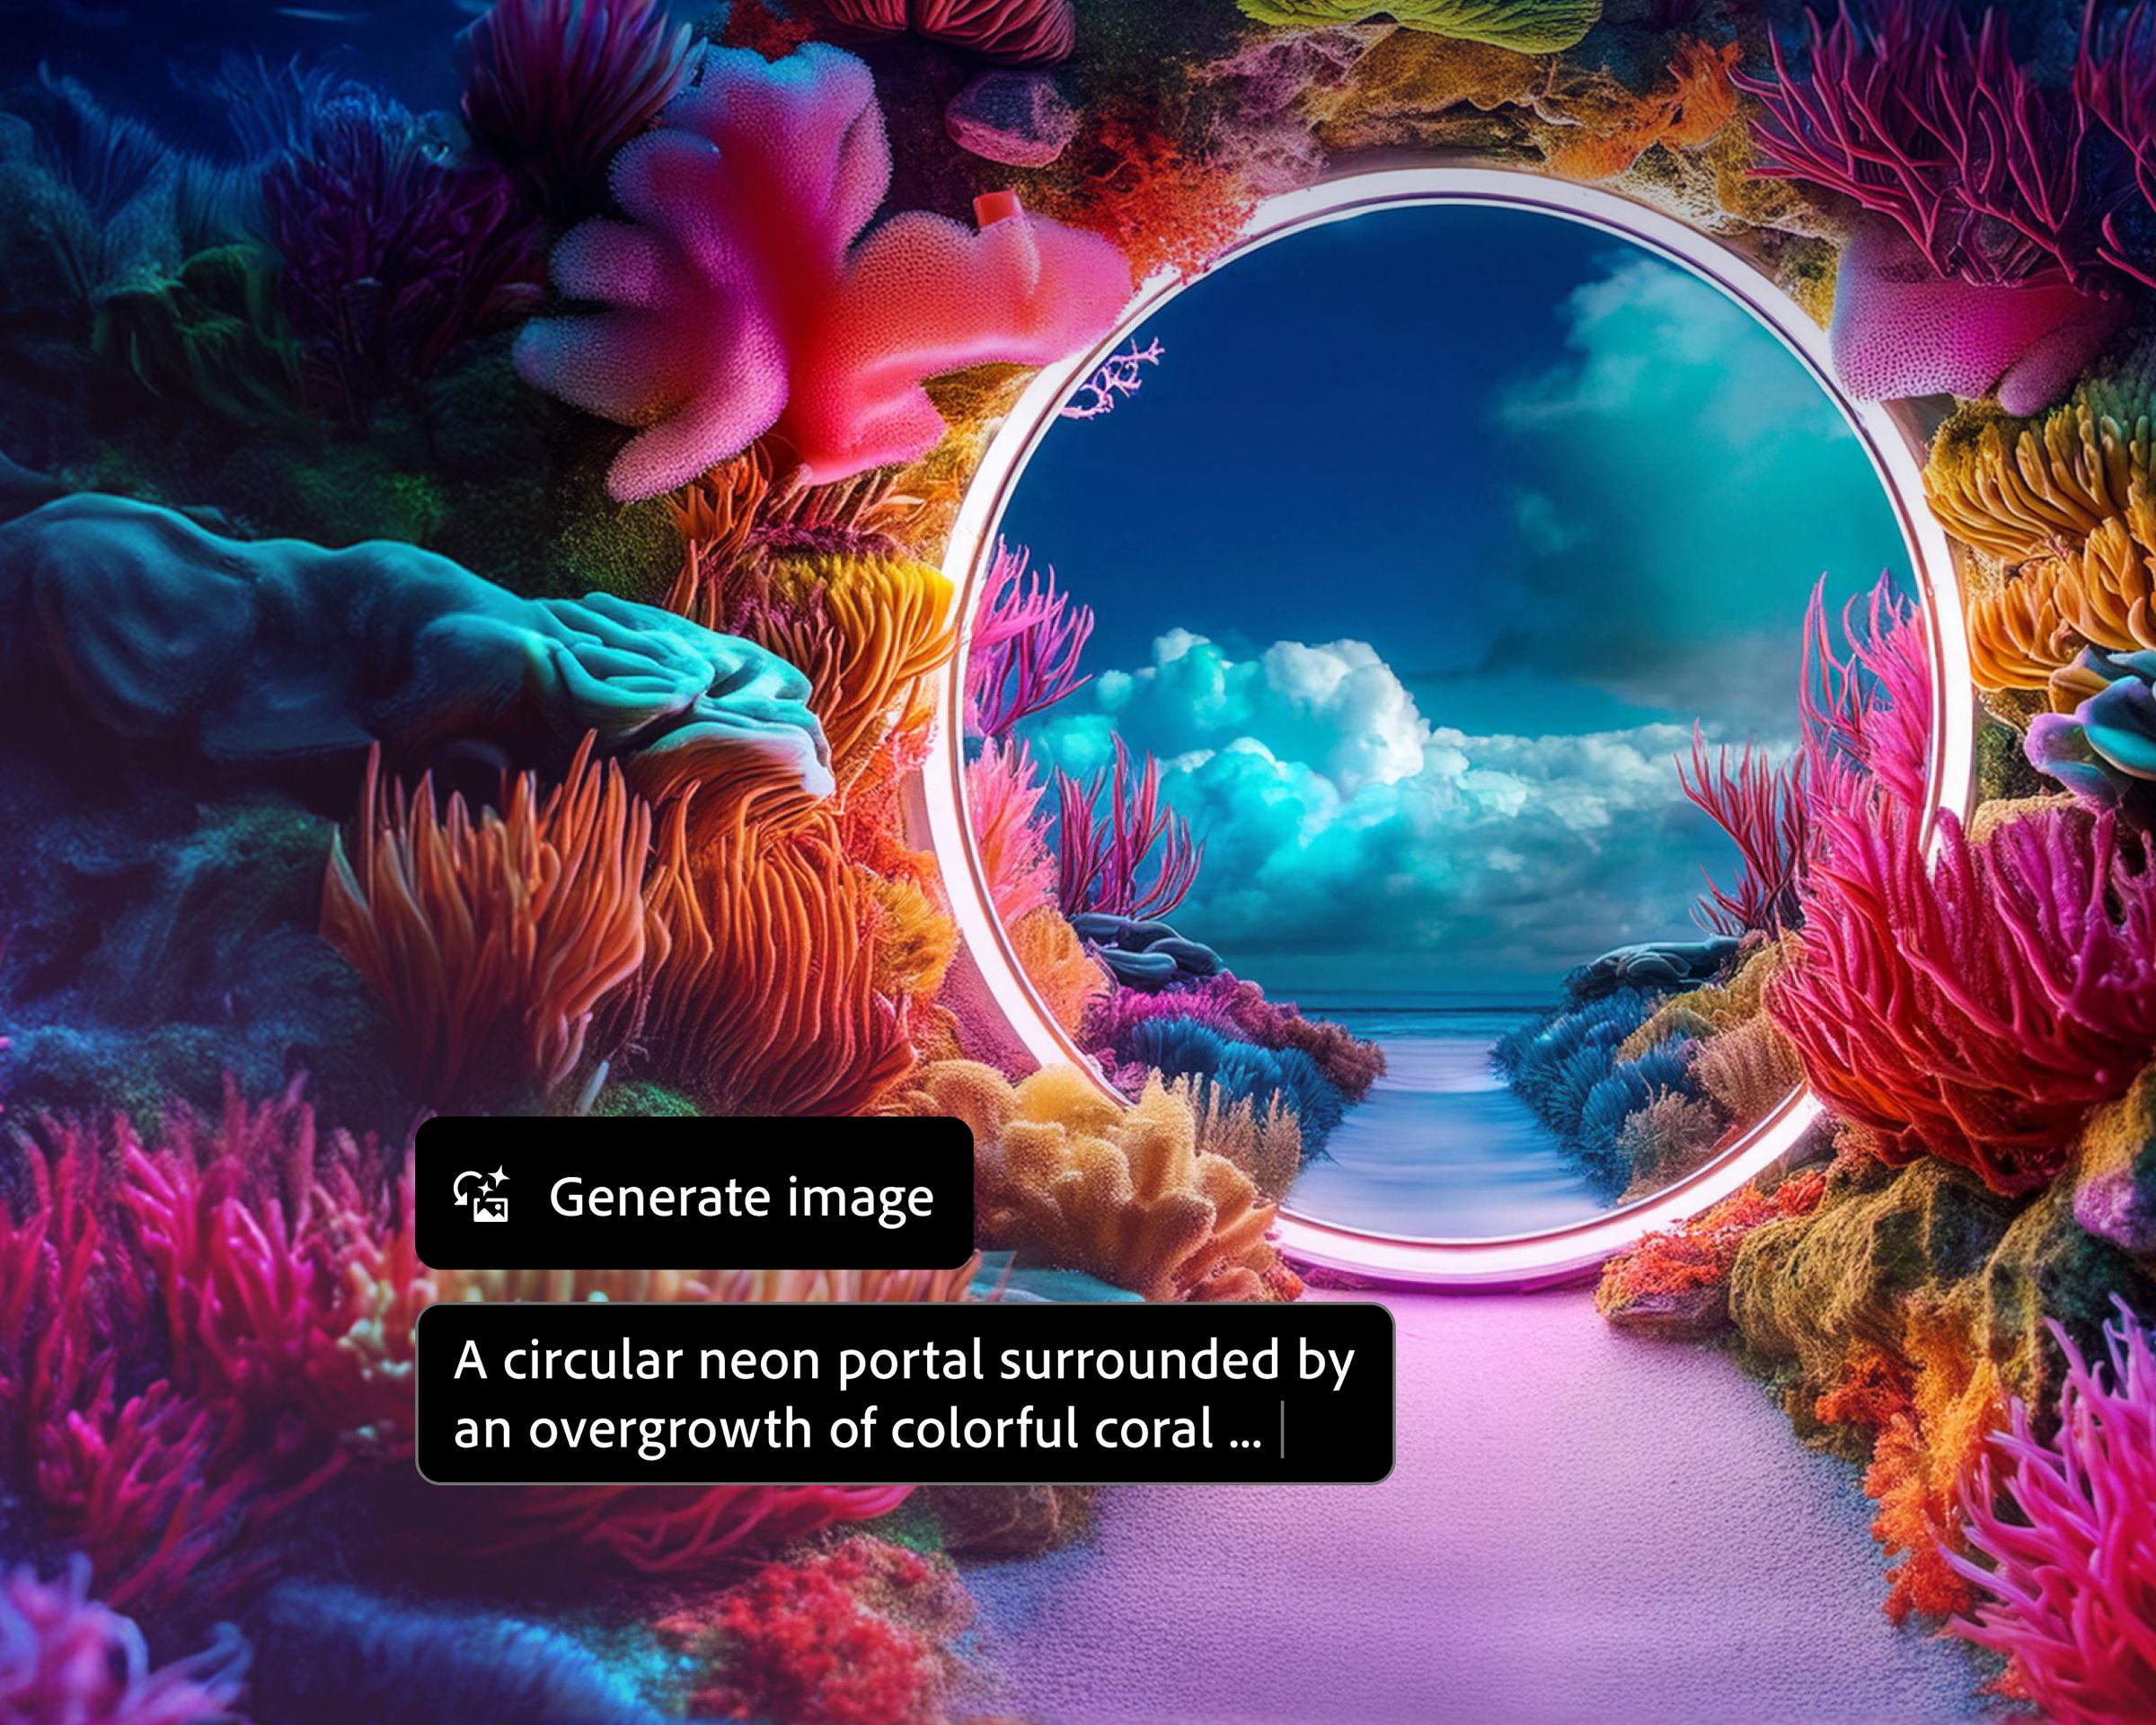 An image showing an example of Photoshop’s new Generate Image feature.